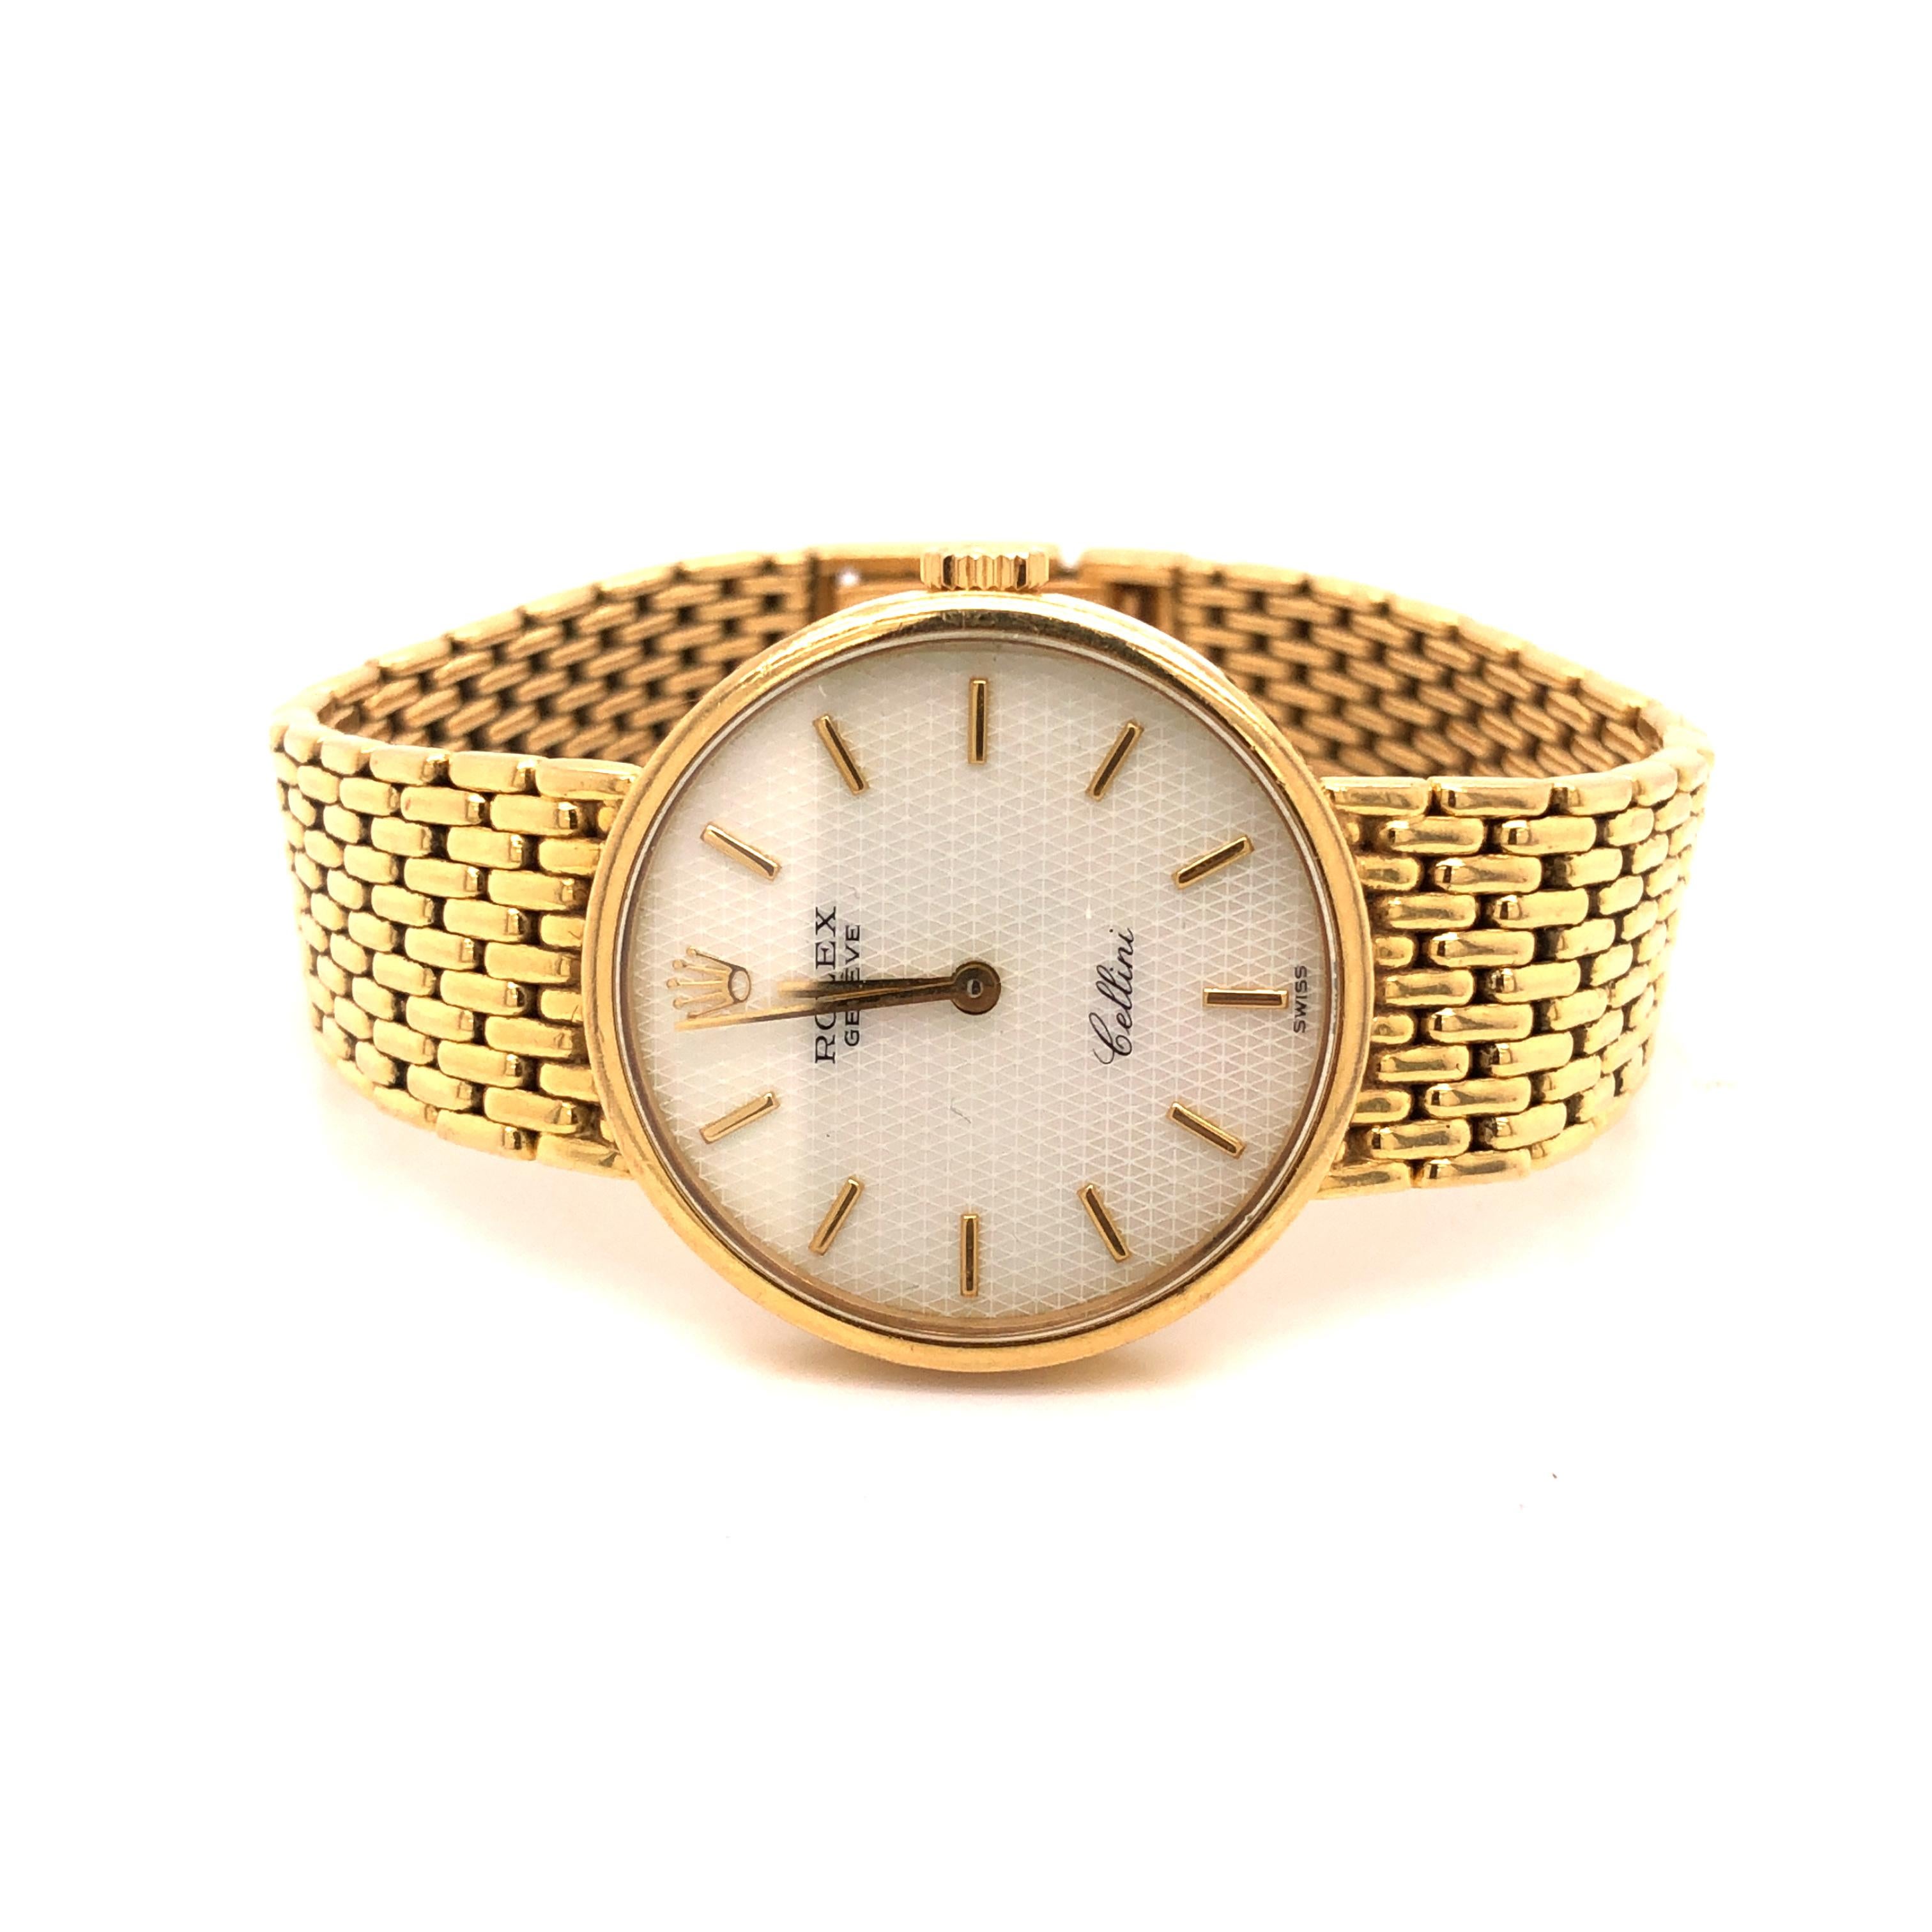 A Rolex 'Cellini' 18K Gold Mother-of-Pearl Watch with a mesh Rolex bracelet. The case measures 26mm in diameter.

Metal: 18K Yellow Gold

Size: 6 1/2